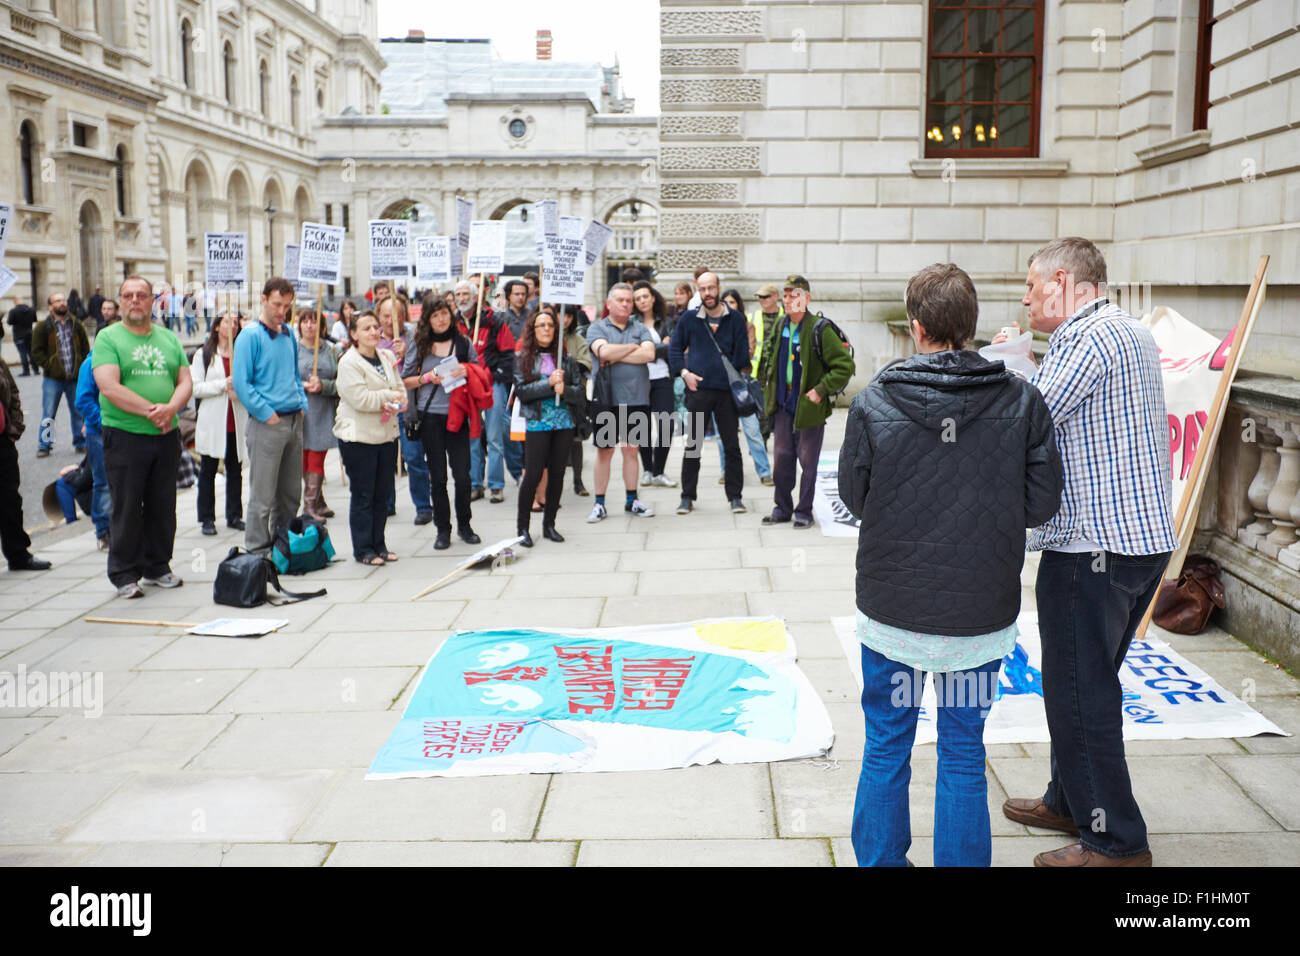 People gather outside the Foreign Office in London to protest against austerity measures Stock Photo